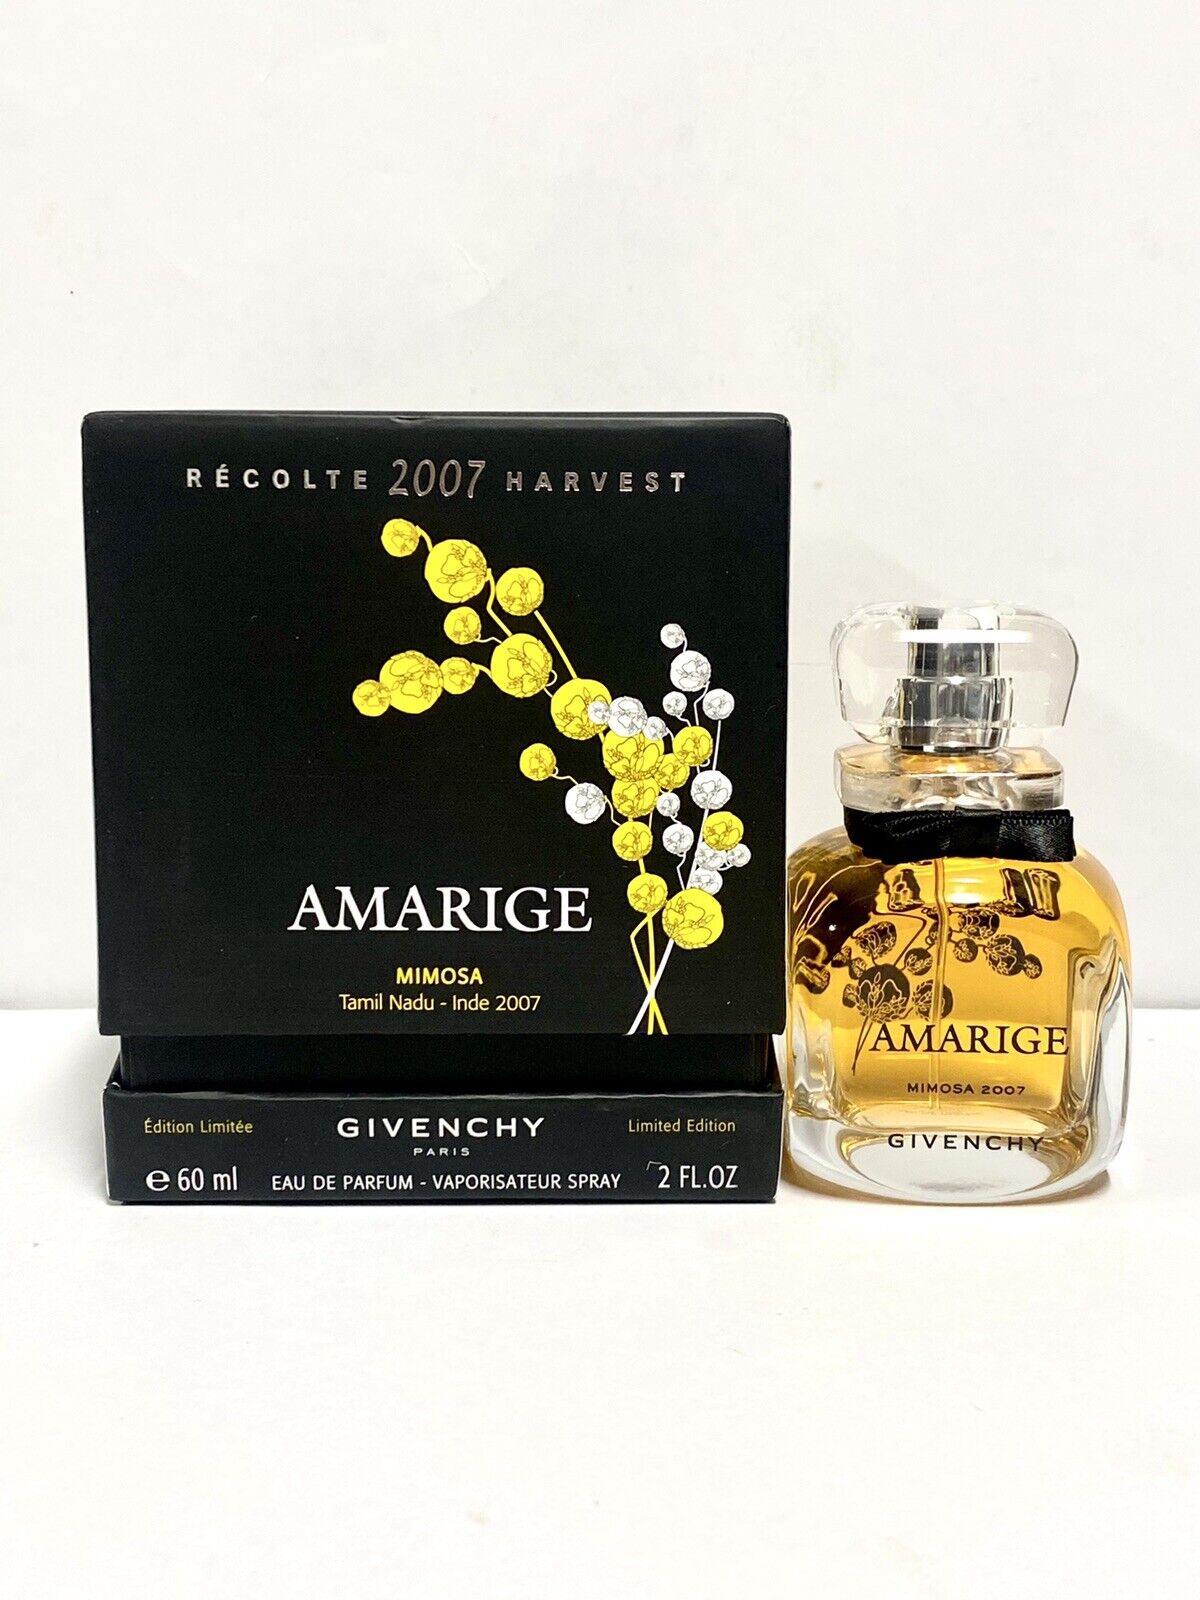 AMARIGE MIMOSA RECOLTE HARVEST by GIVENCHY 2.0oz-60ml EDP Spr 2007 EDITION (BO30